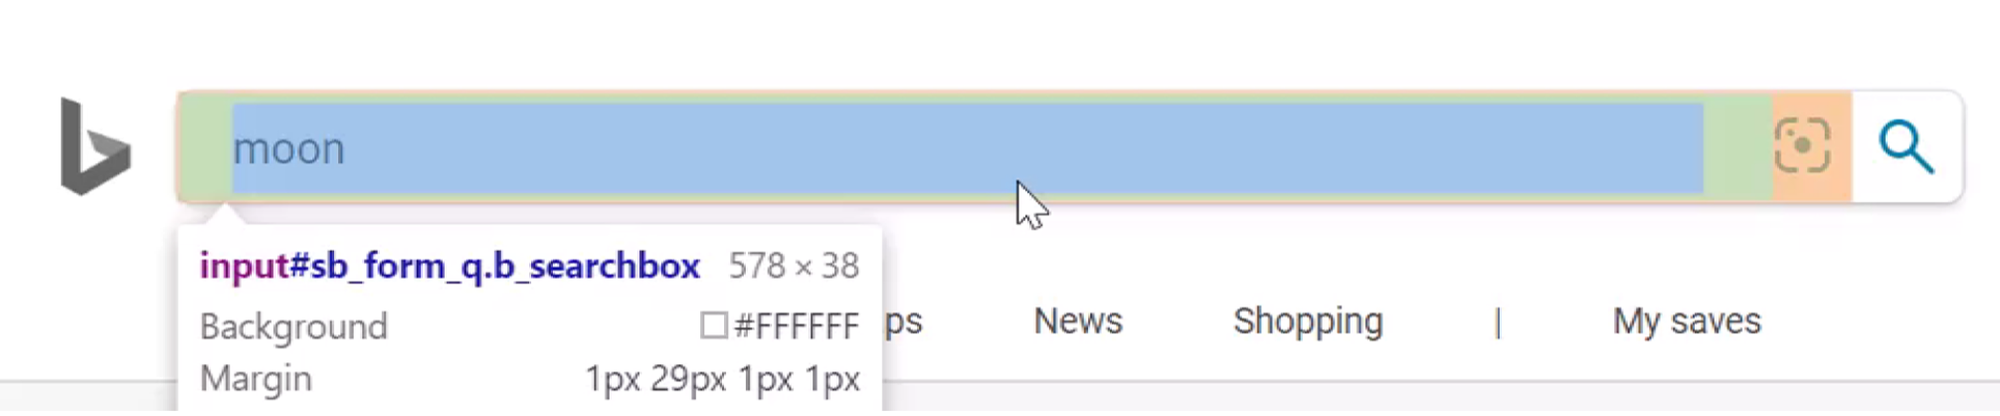 Bing improves search box margins Figure5_search_box_removed_margins.png